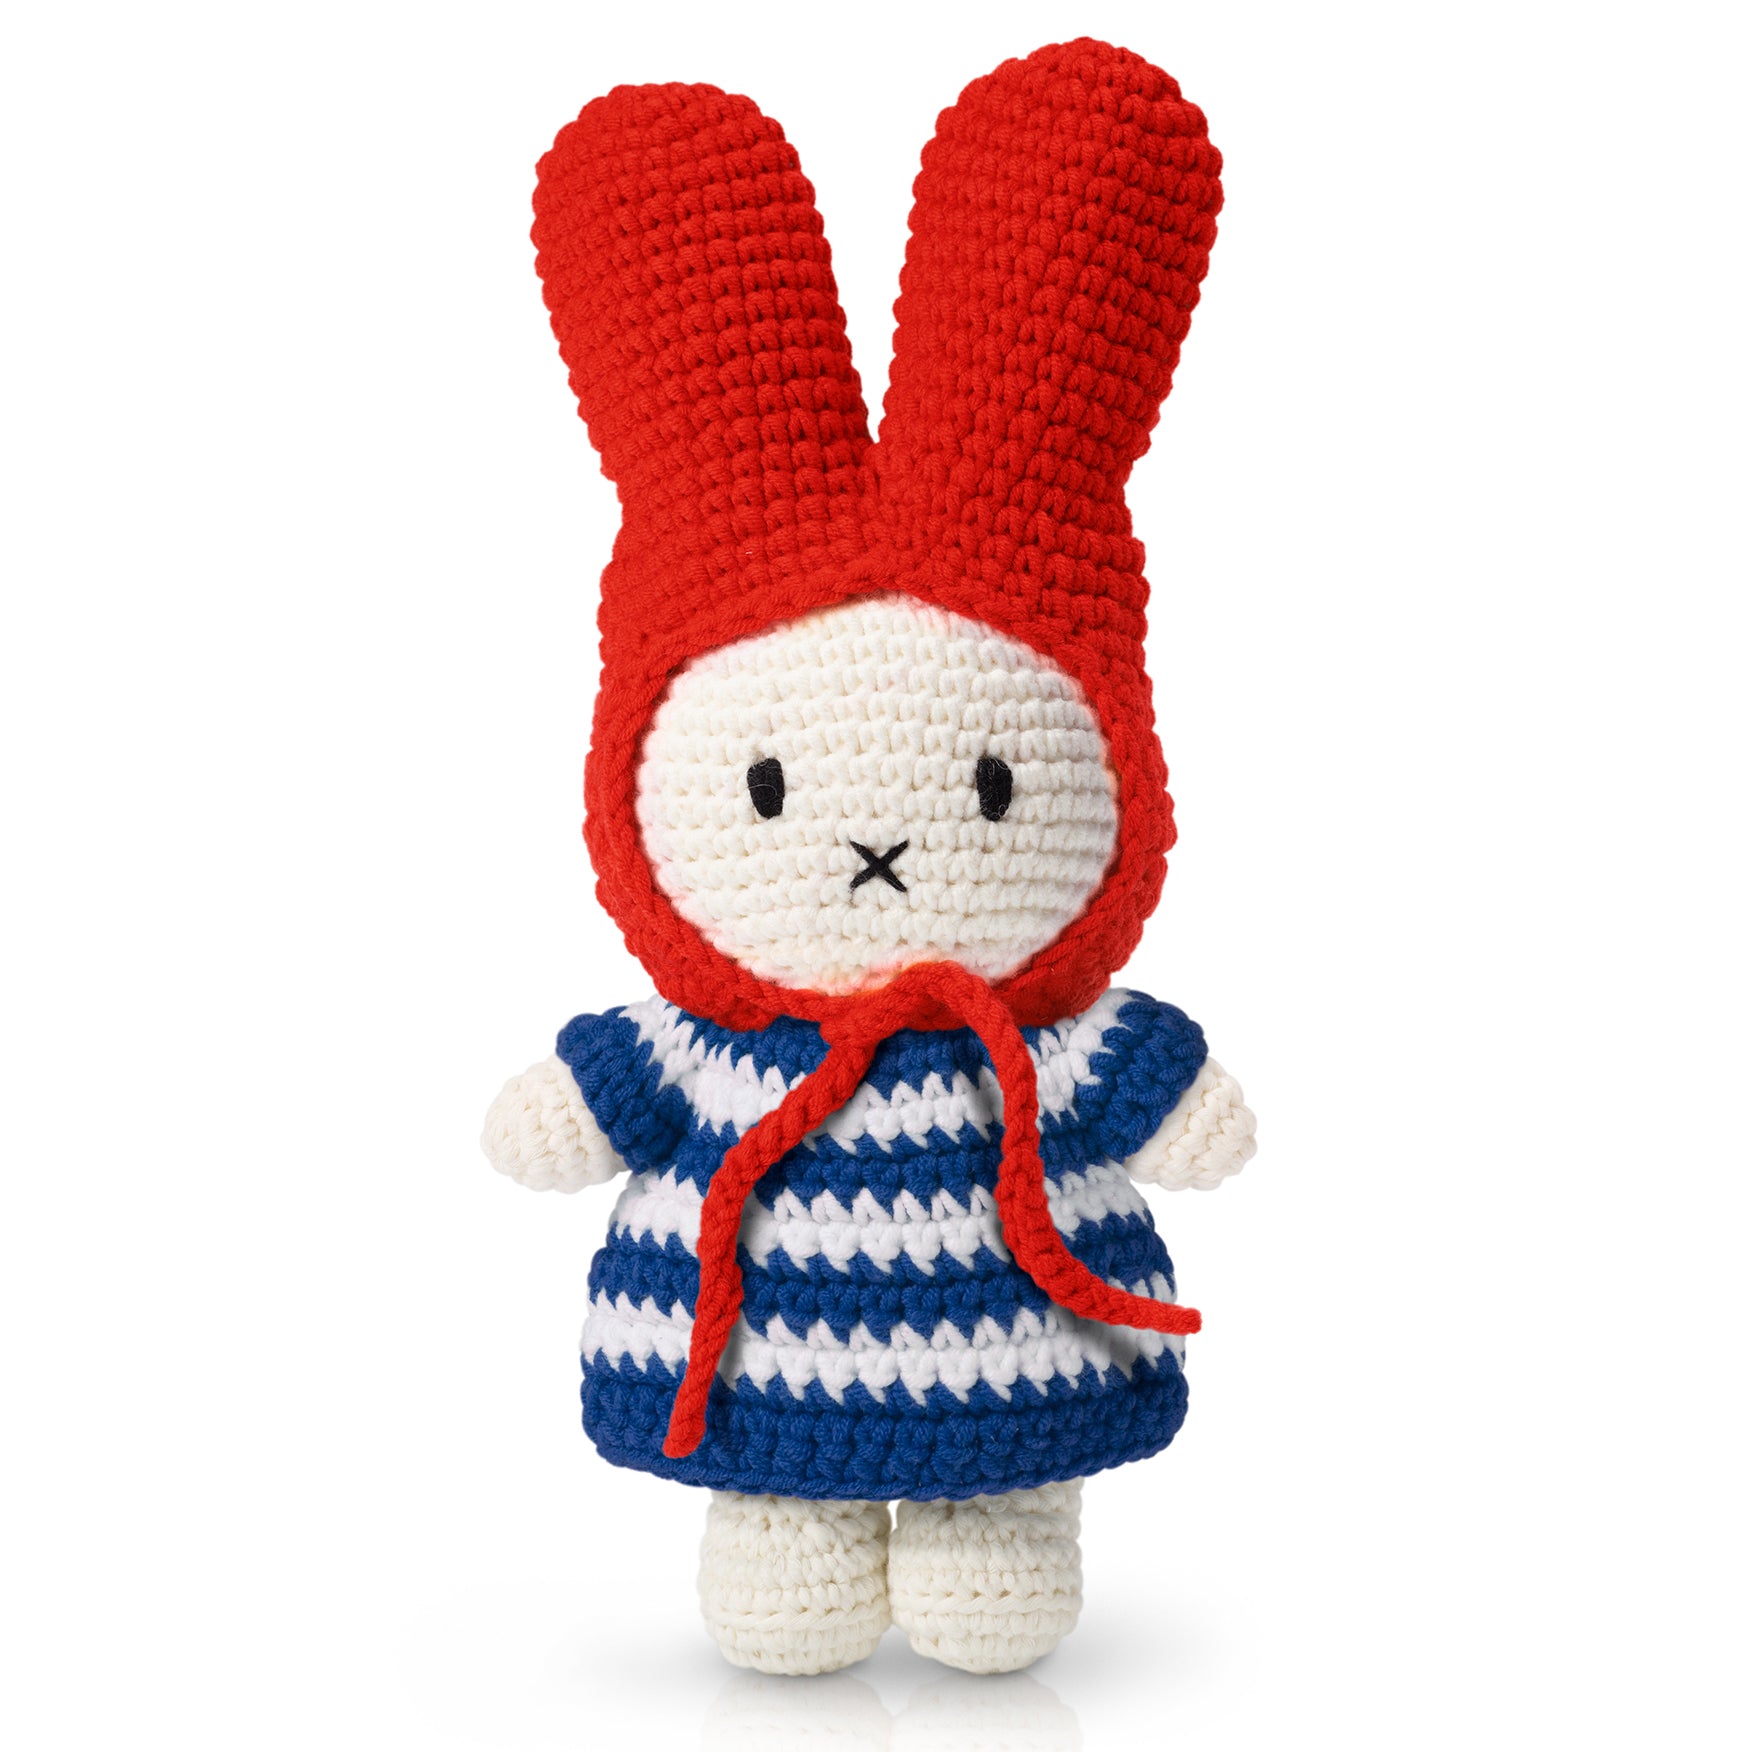 Handmade Miffy - Blue striped dress and red hat